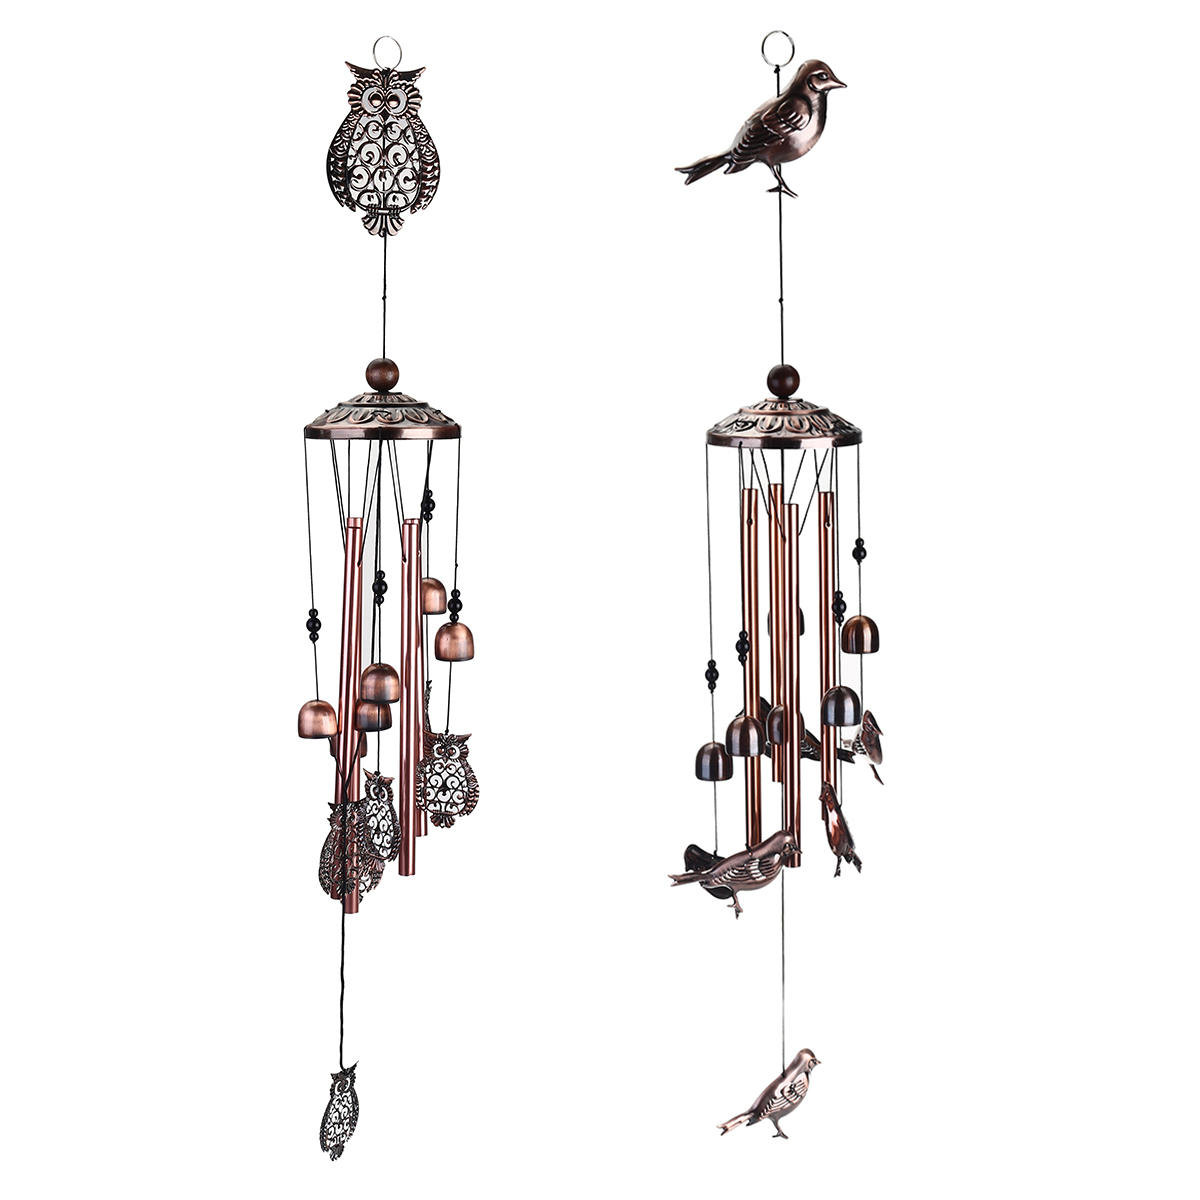 Brass-Bell-Wind-Chime-Ornaments-European-And-American-Garden-Home-Decoration-1777951-7